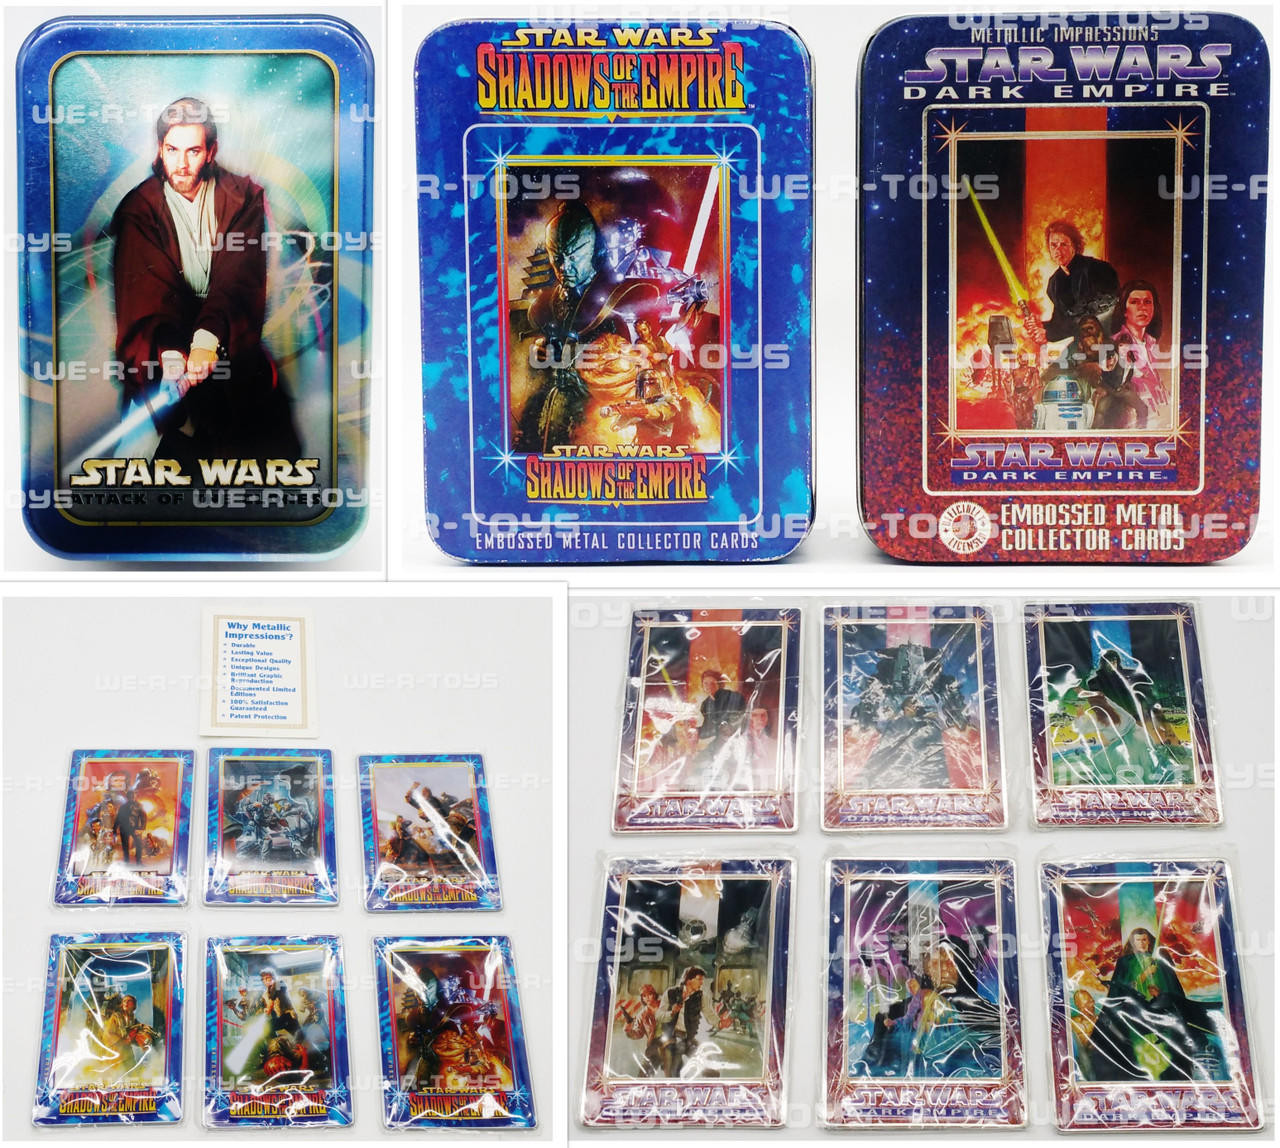 Star Wars 12 Metal Collector Cards With Collector Tins Metallic Impressions  USED